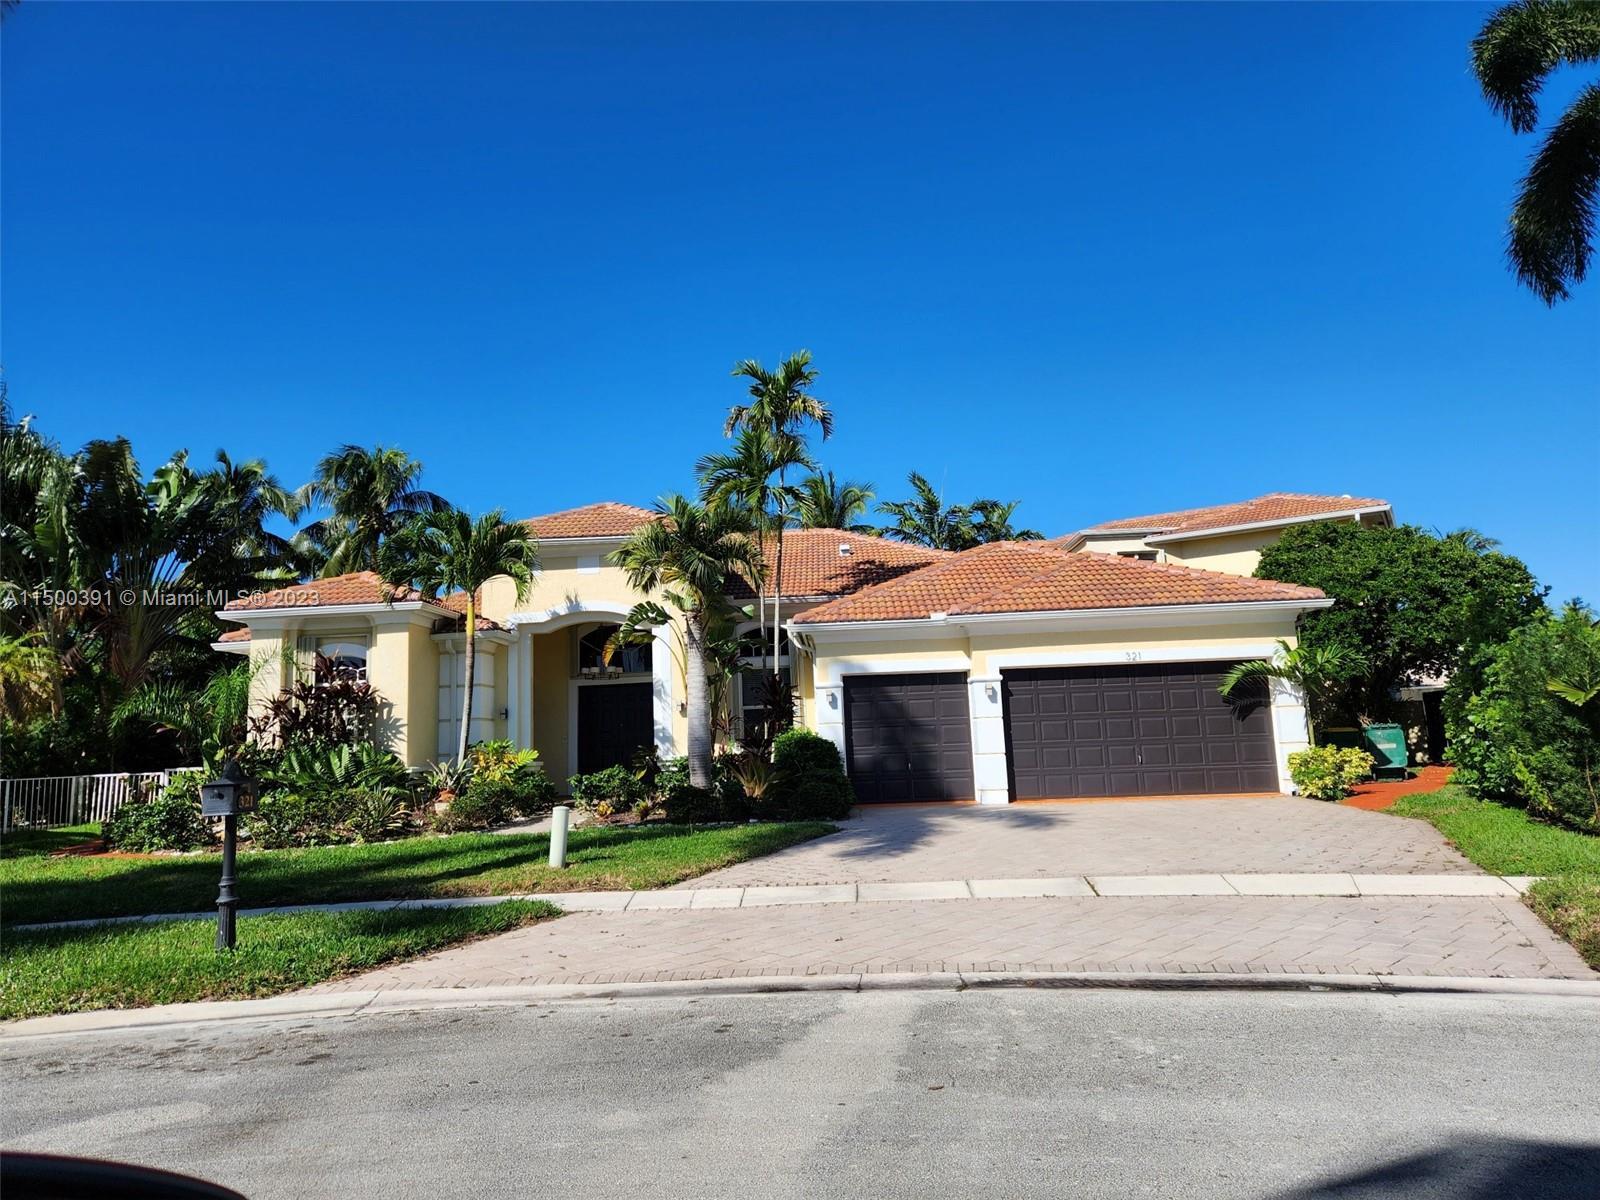 Photo of 321 Windmill Palm Ave in Plantation, FL